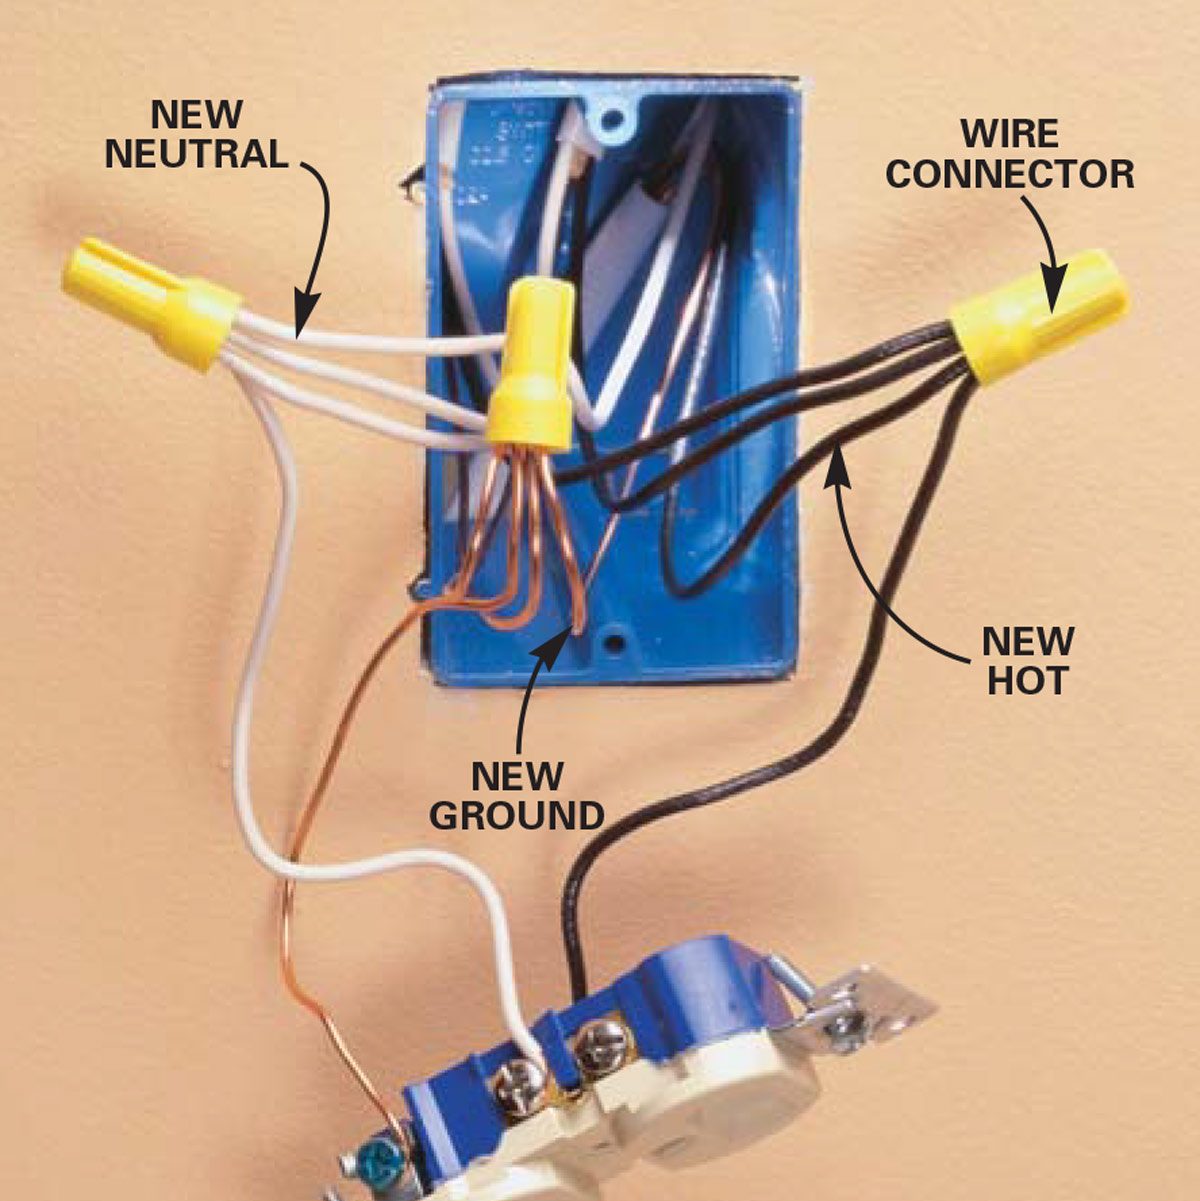 Rewire the existing electrical outlet